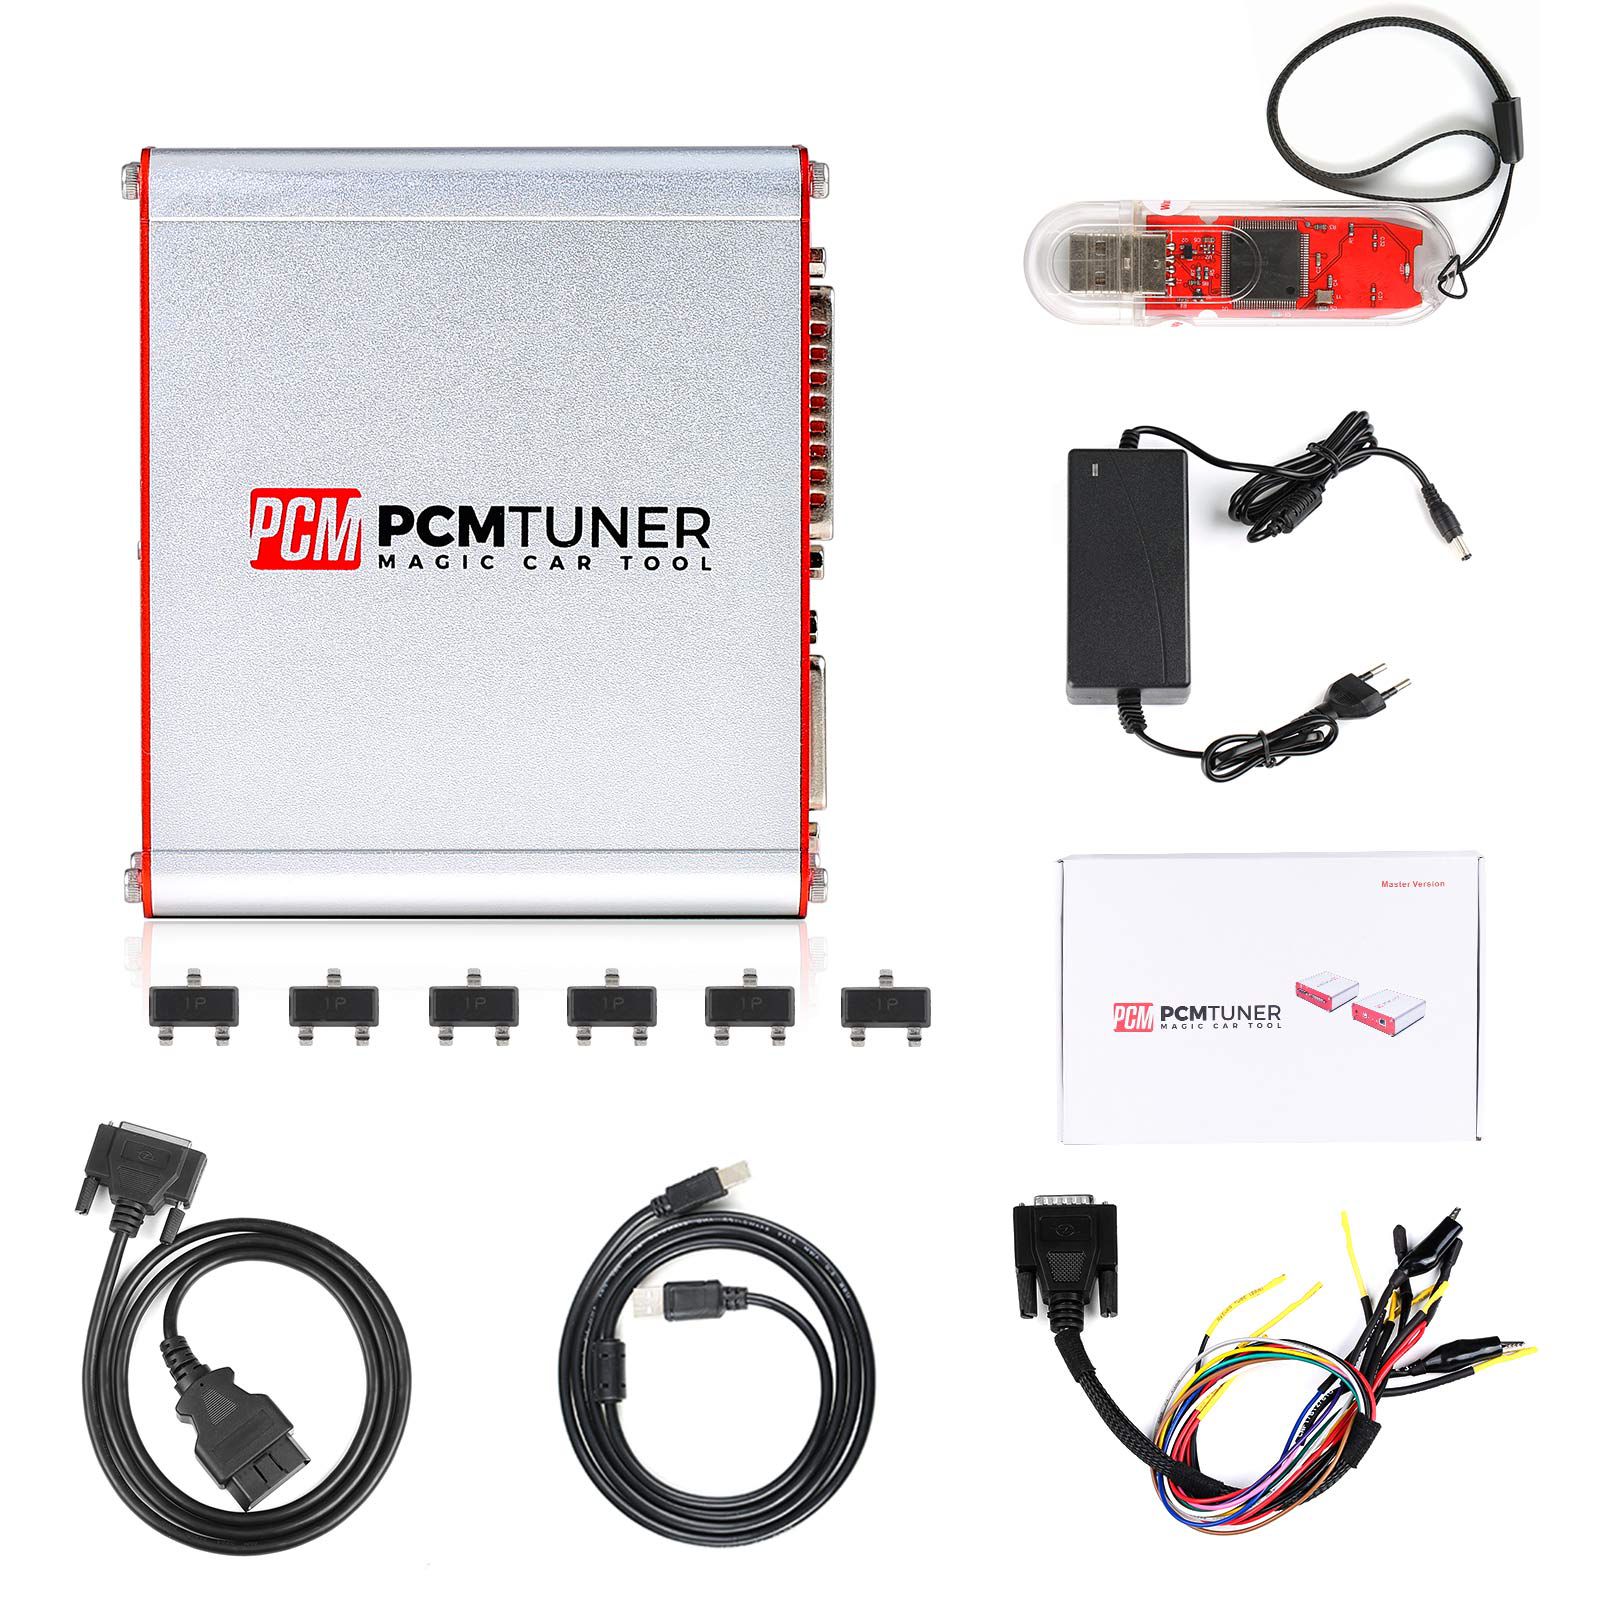 PCMtuner ECU Programmer with 67 Modules with Silicone Case and Plastic Carrying Box